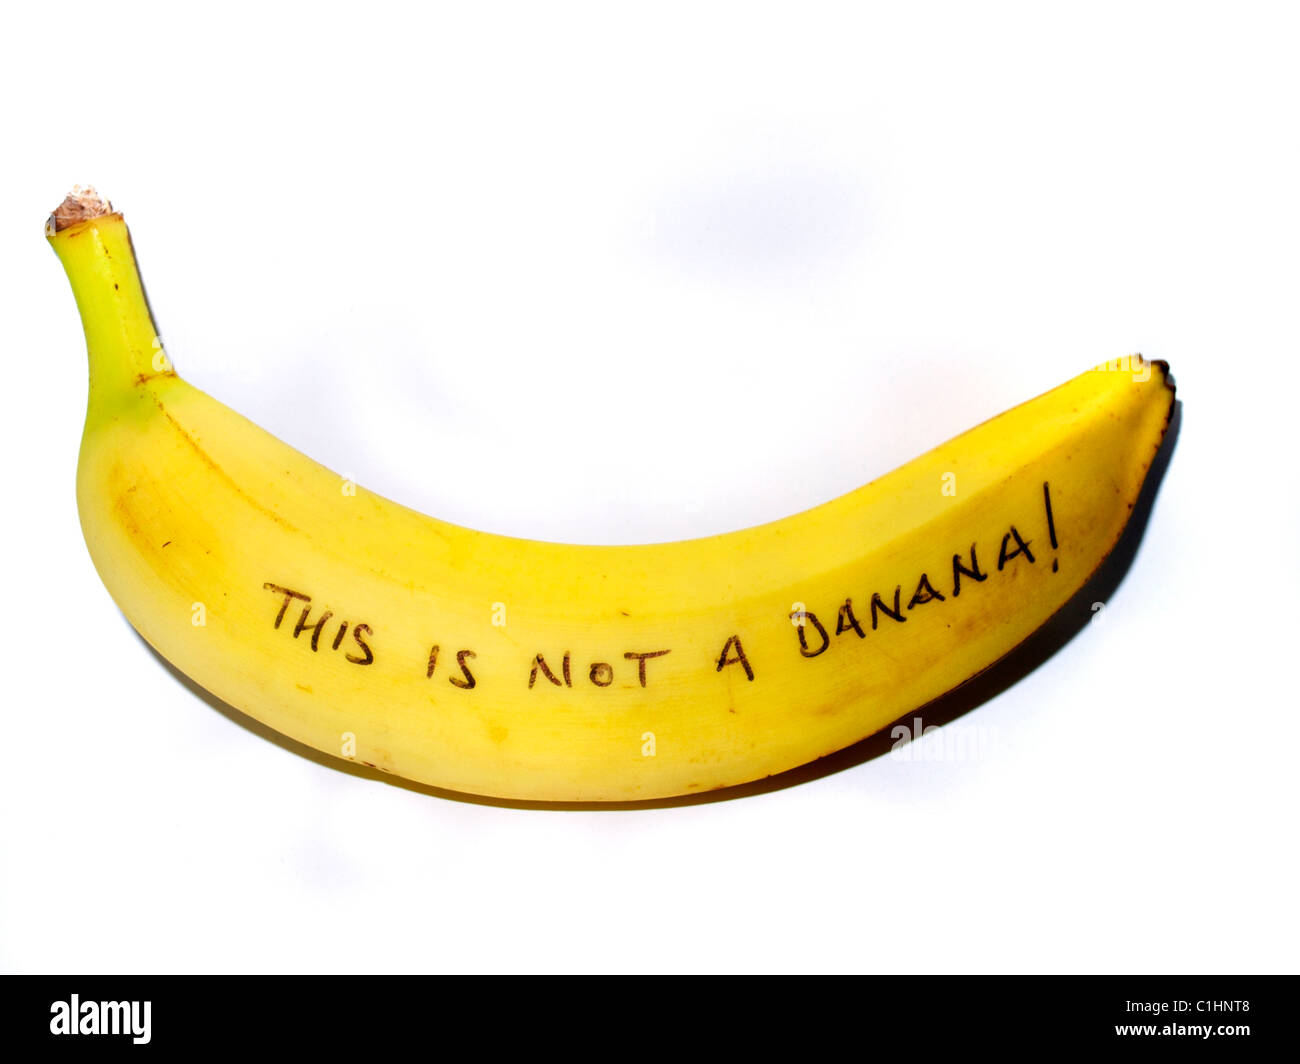 "This is not a banana" Stock Photo